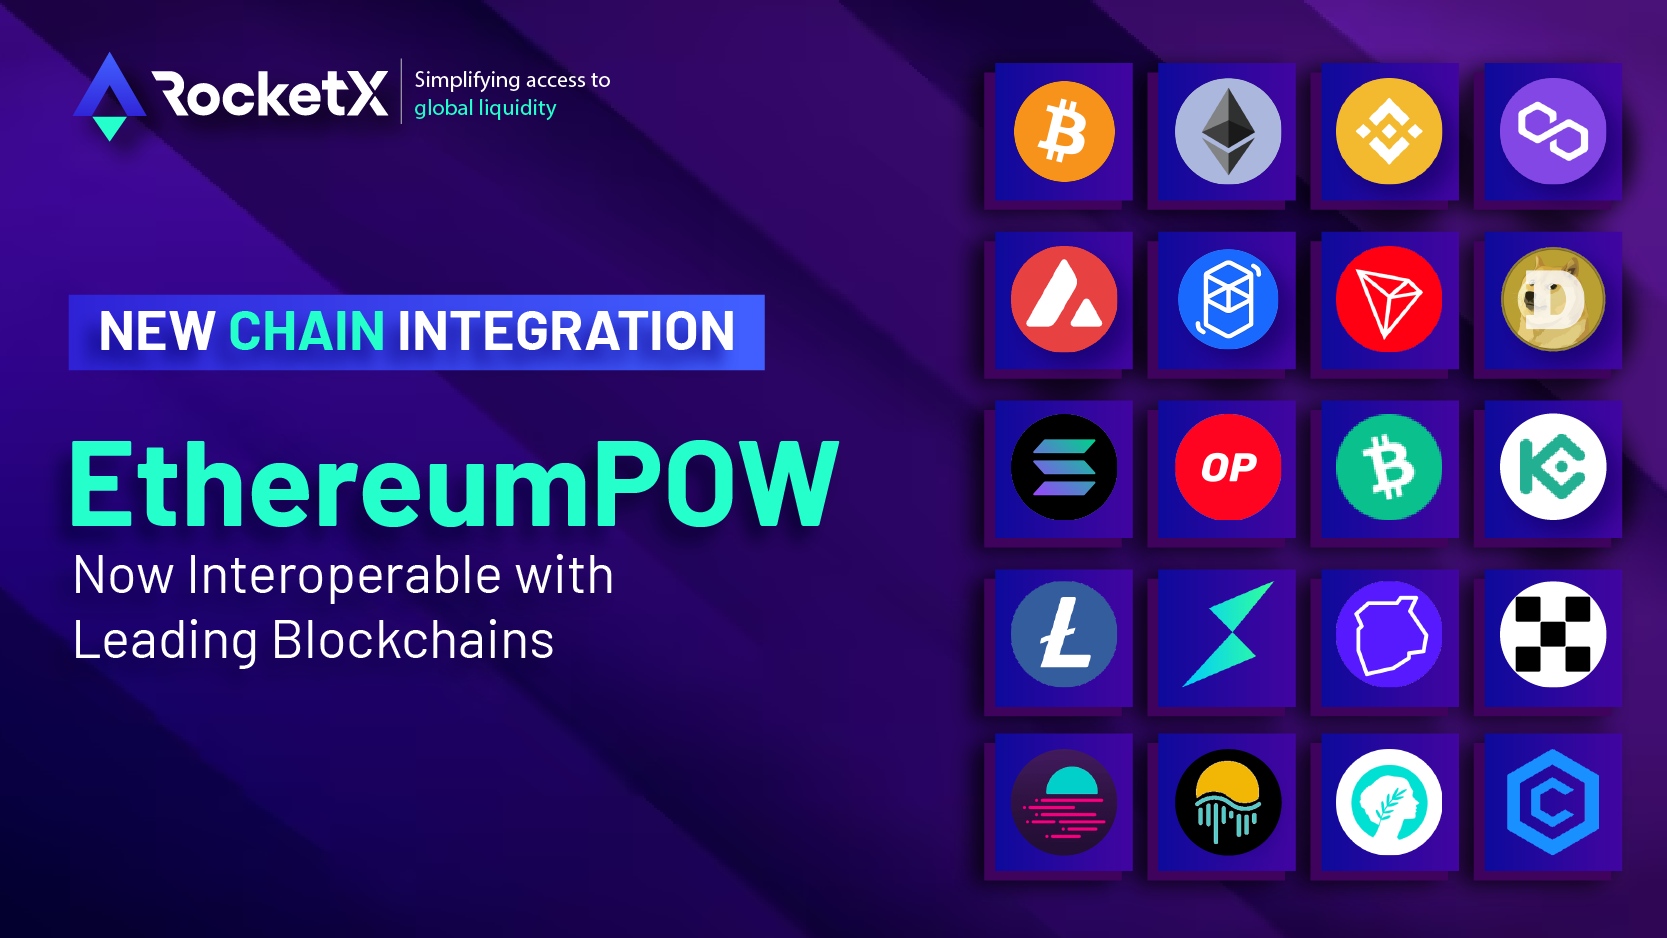 EthereumPOW (ETHW) Enters into a Strategic Partnership with RocketX to Simplify Access to Liquidity Across Both CEX & DEX